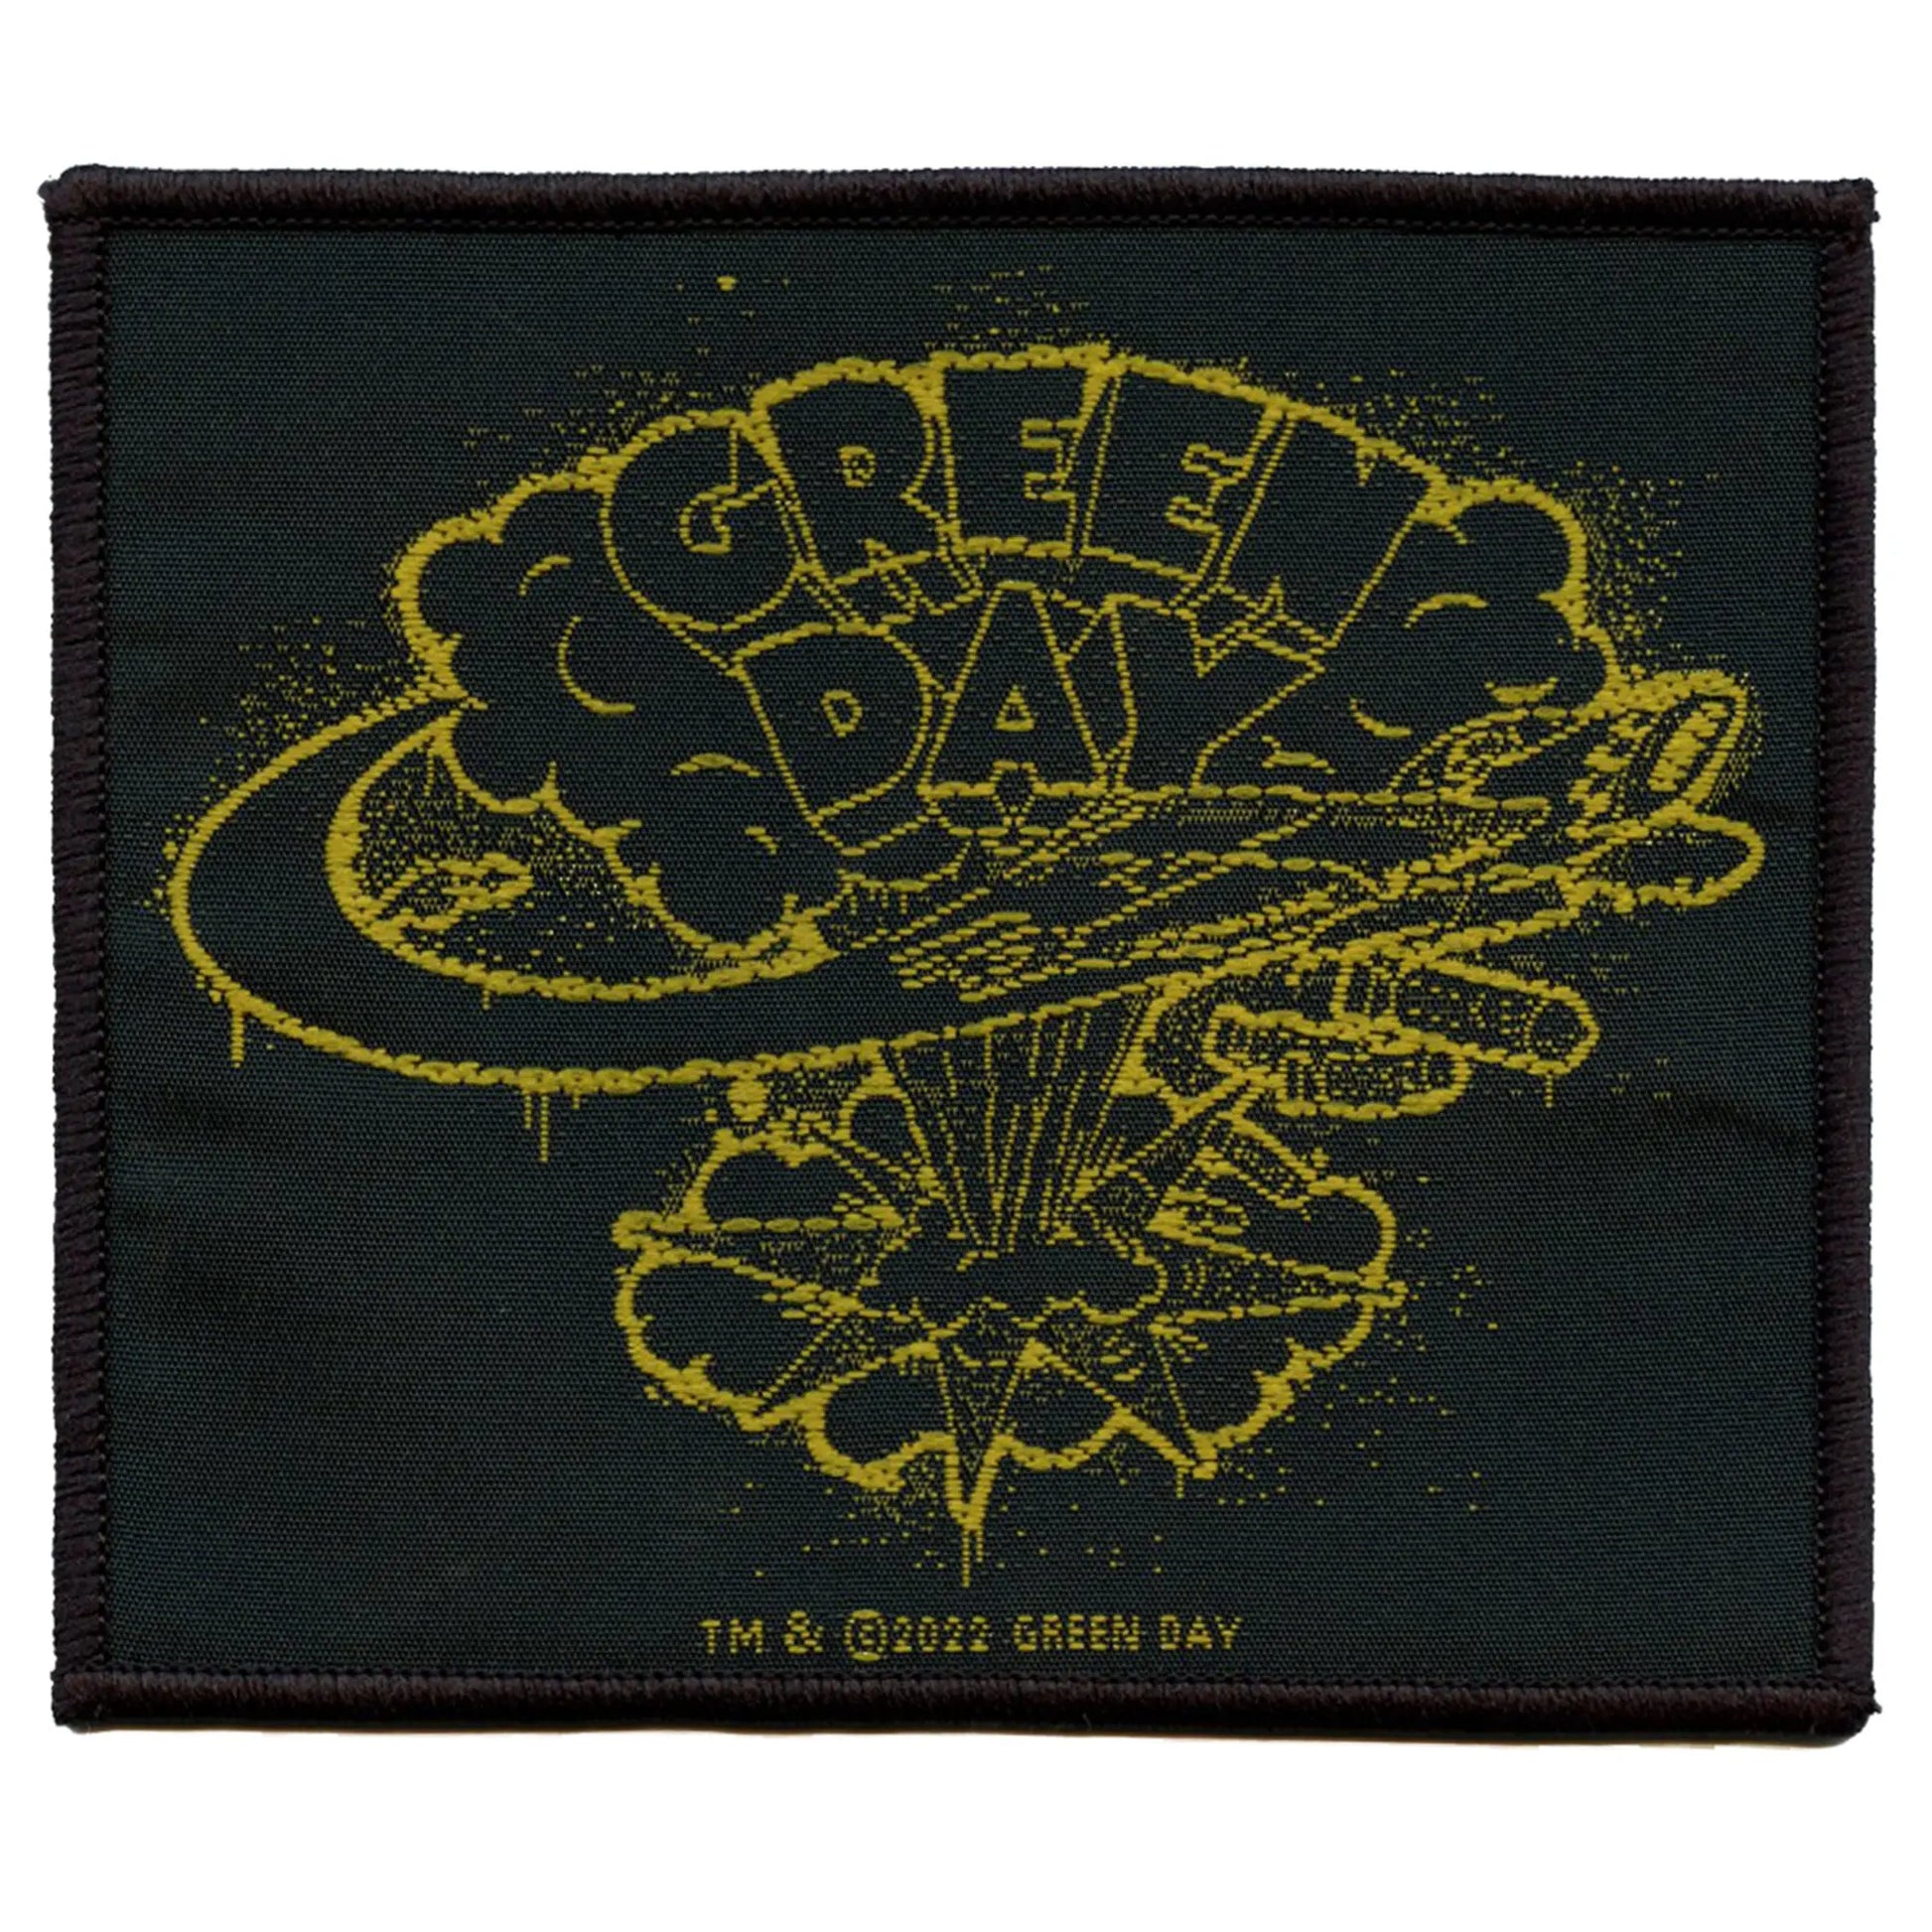 Green Day Dookie Album Patch Punk Rock Band Woven Iron On